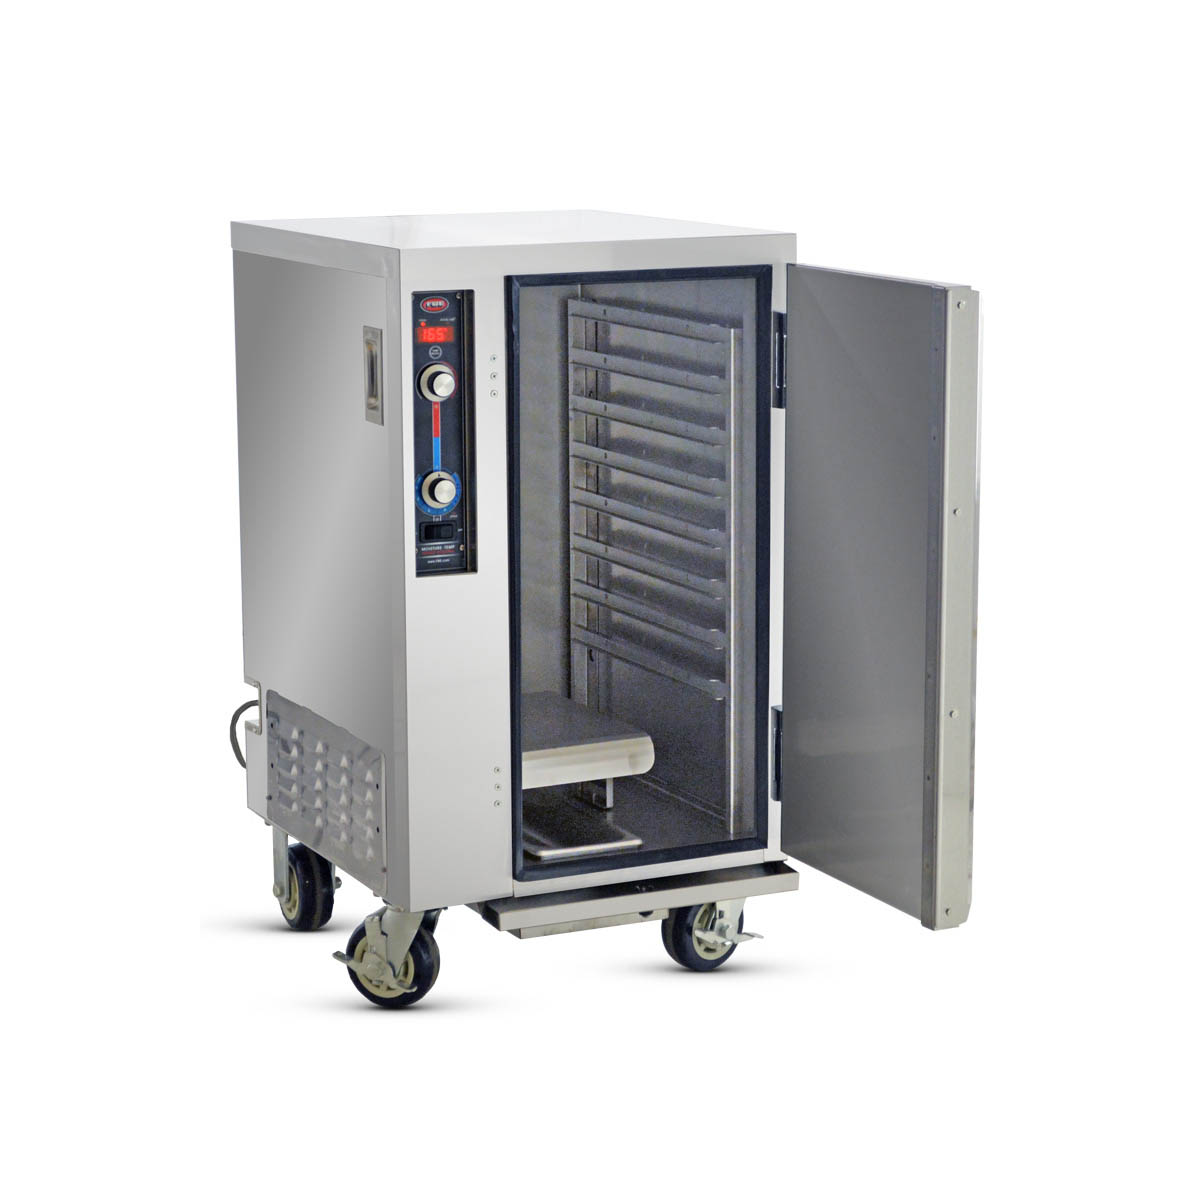 FWE MT-1220-8 1/2 Height Insulated Mobile Heated Cabinet